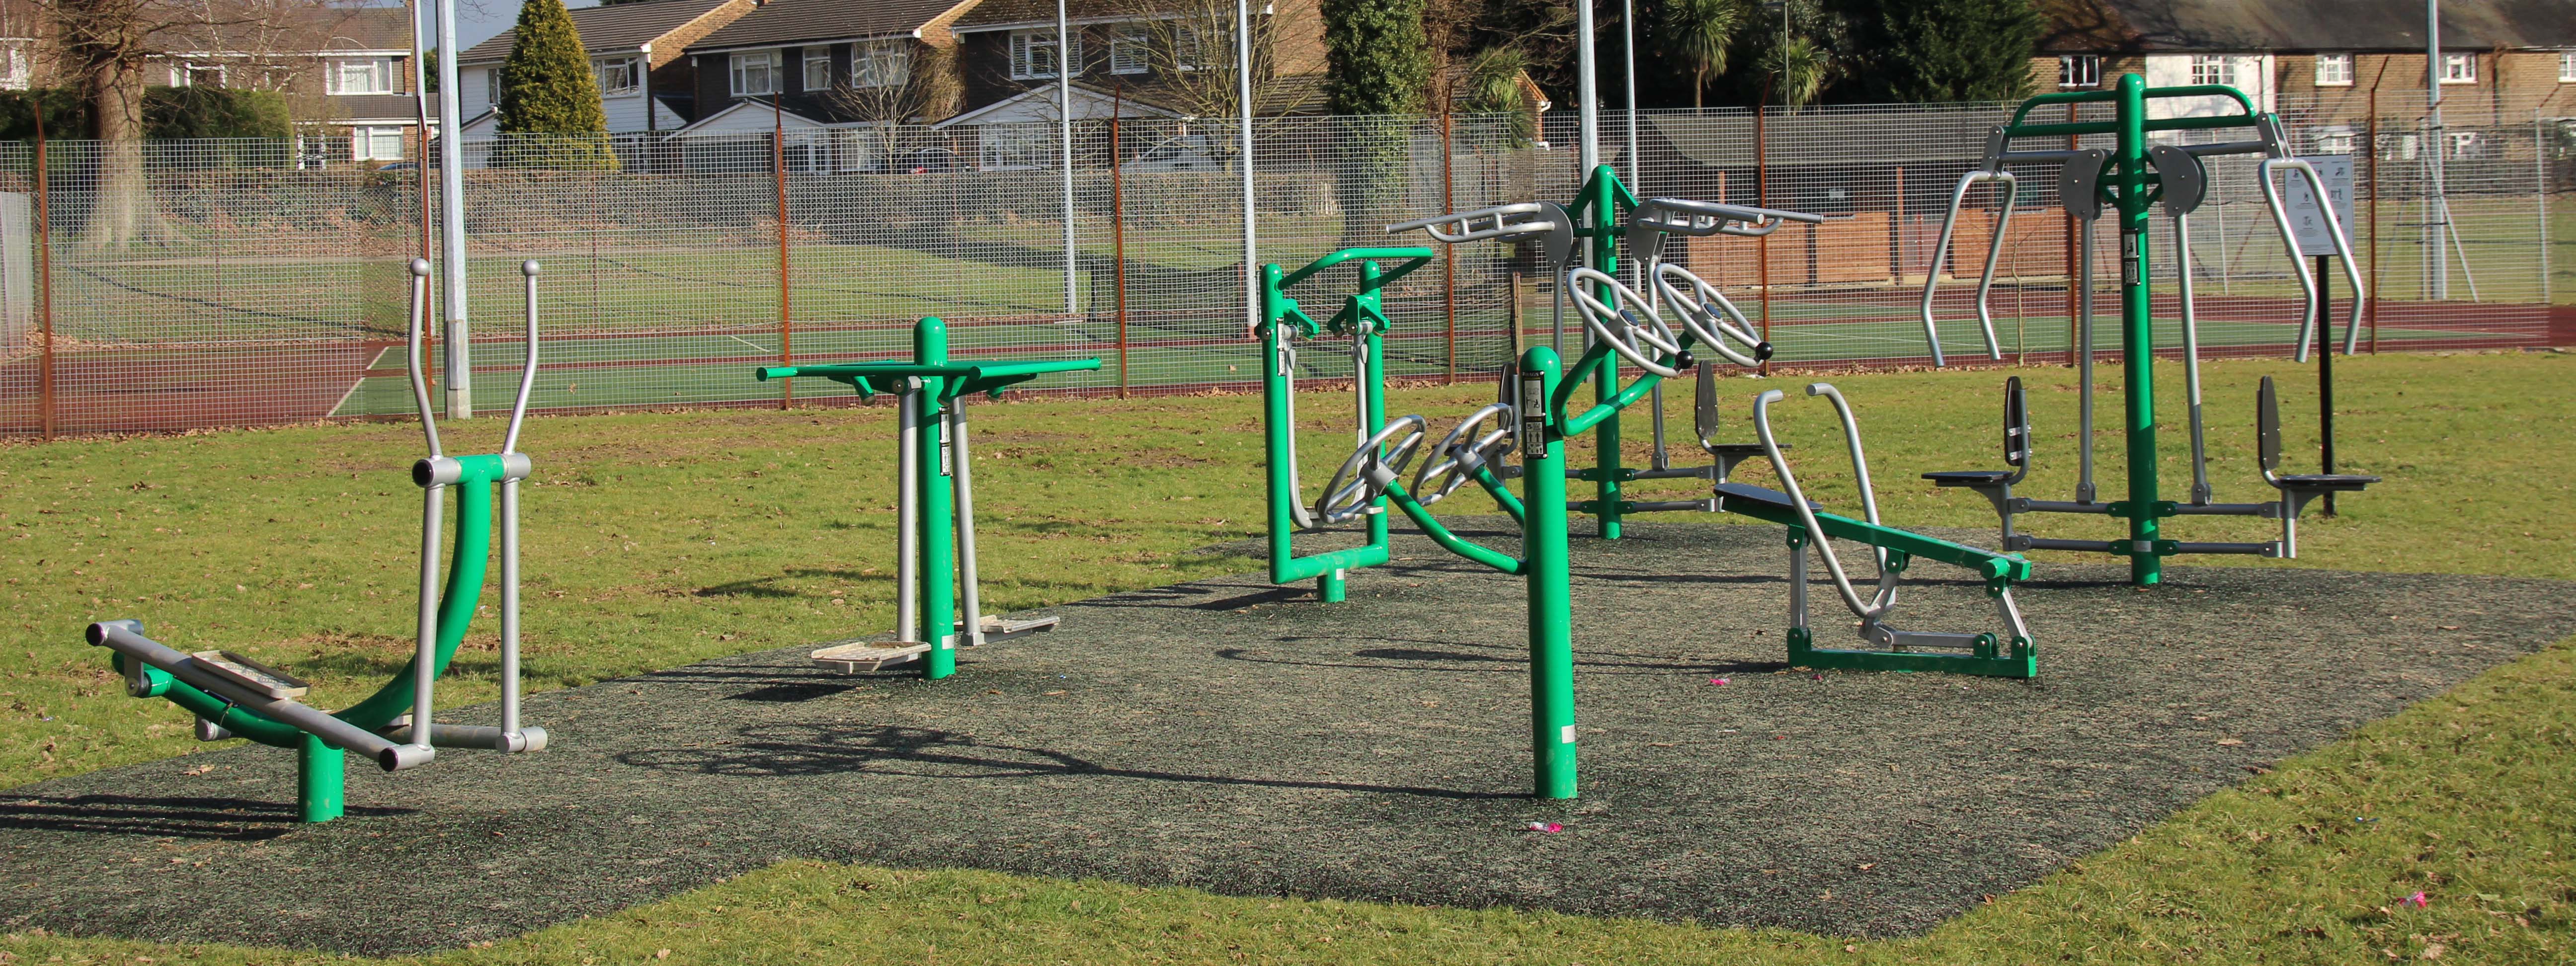 New outdoor exercise equipment installed – Holland Sports & Social Club